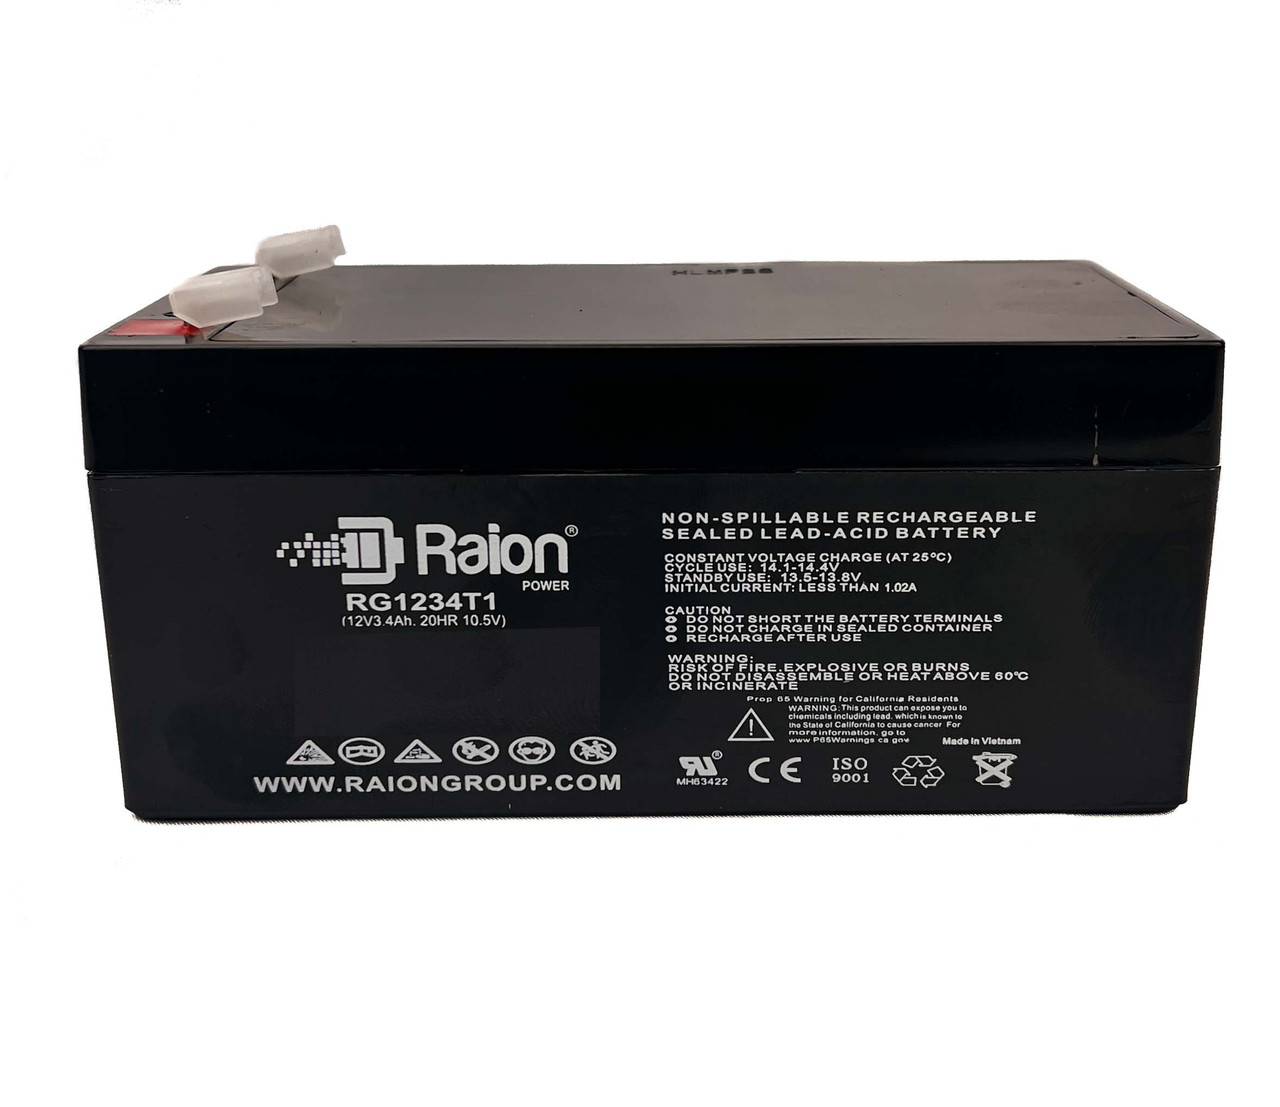 Raion Power RG1234T1 Rechargeable Compatible Replacement Battery for Mule PM1232